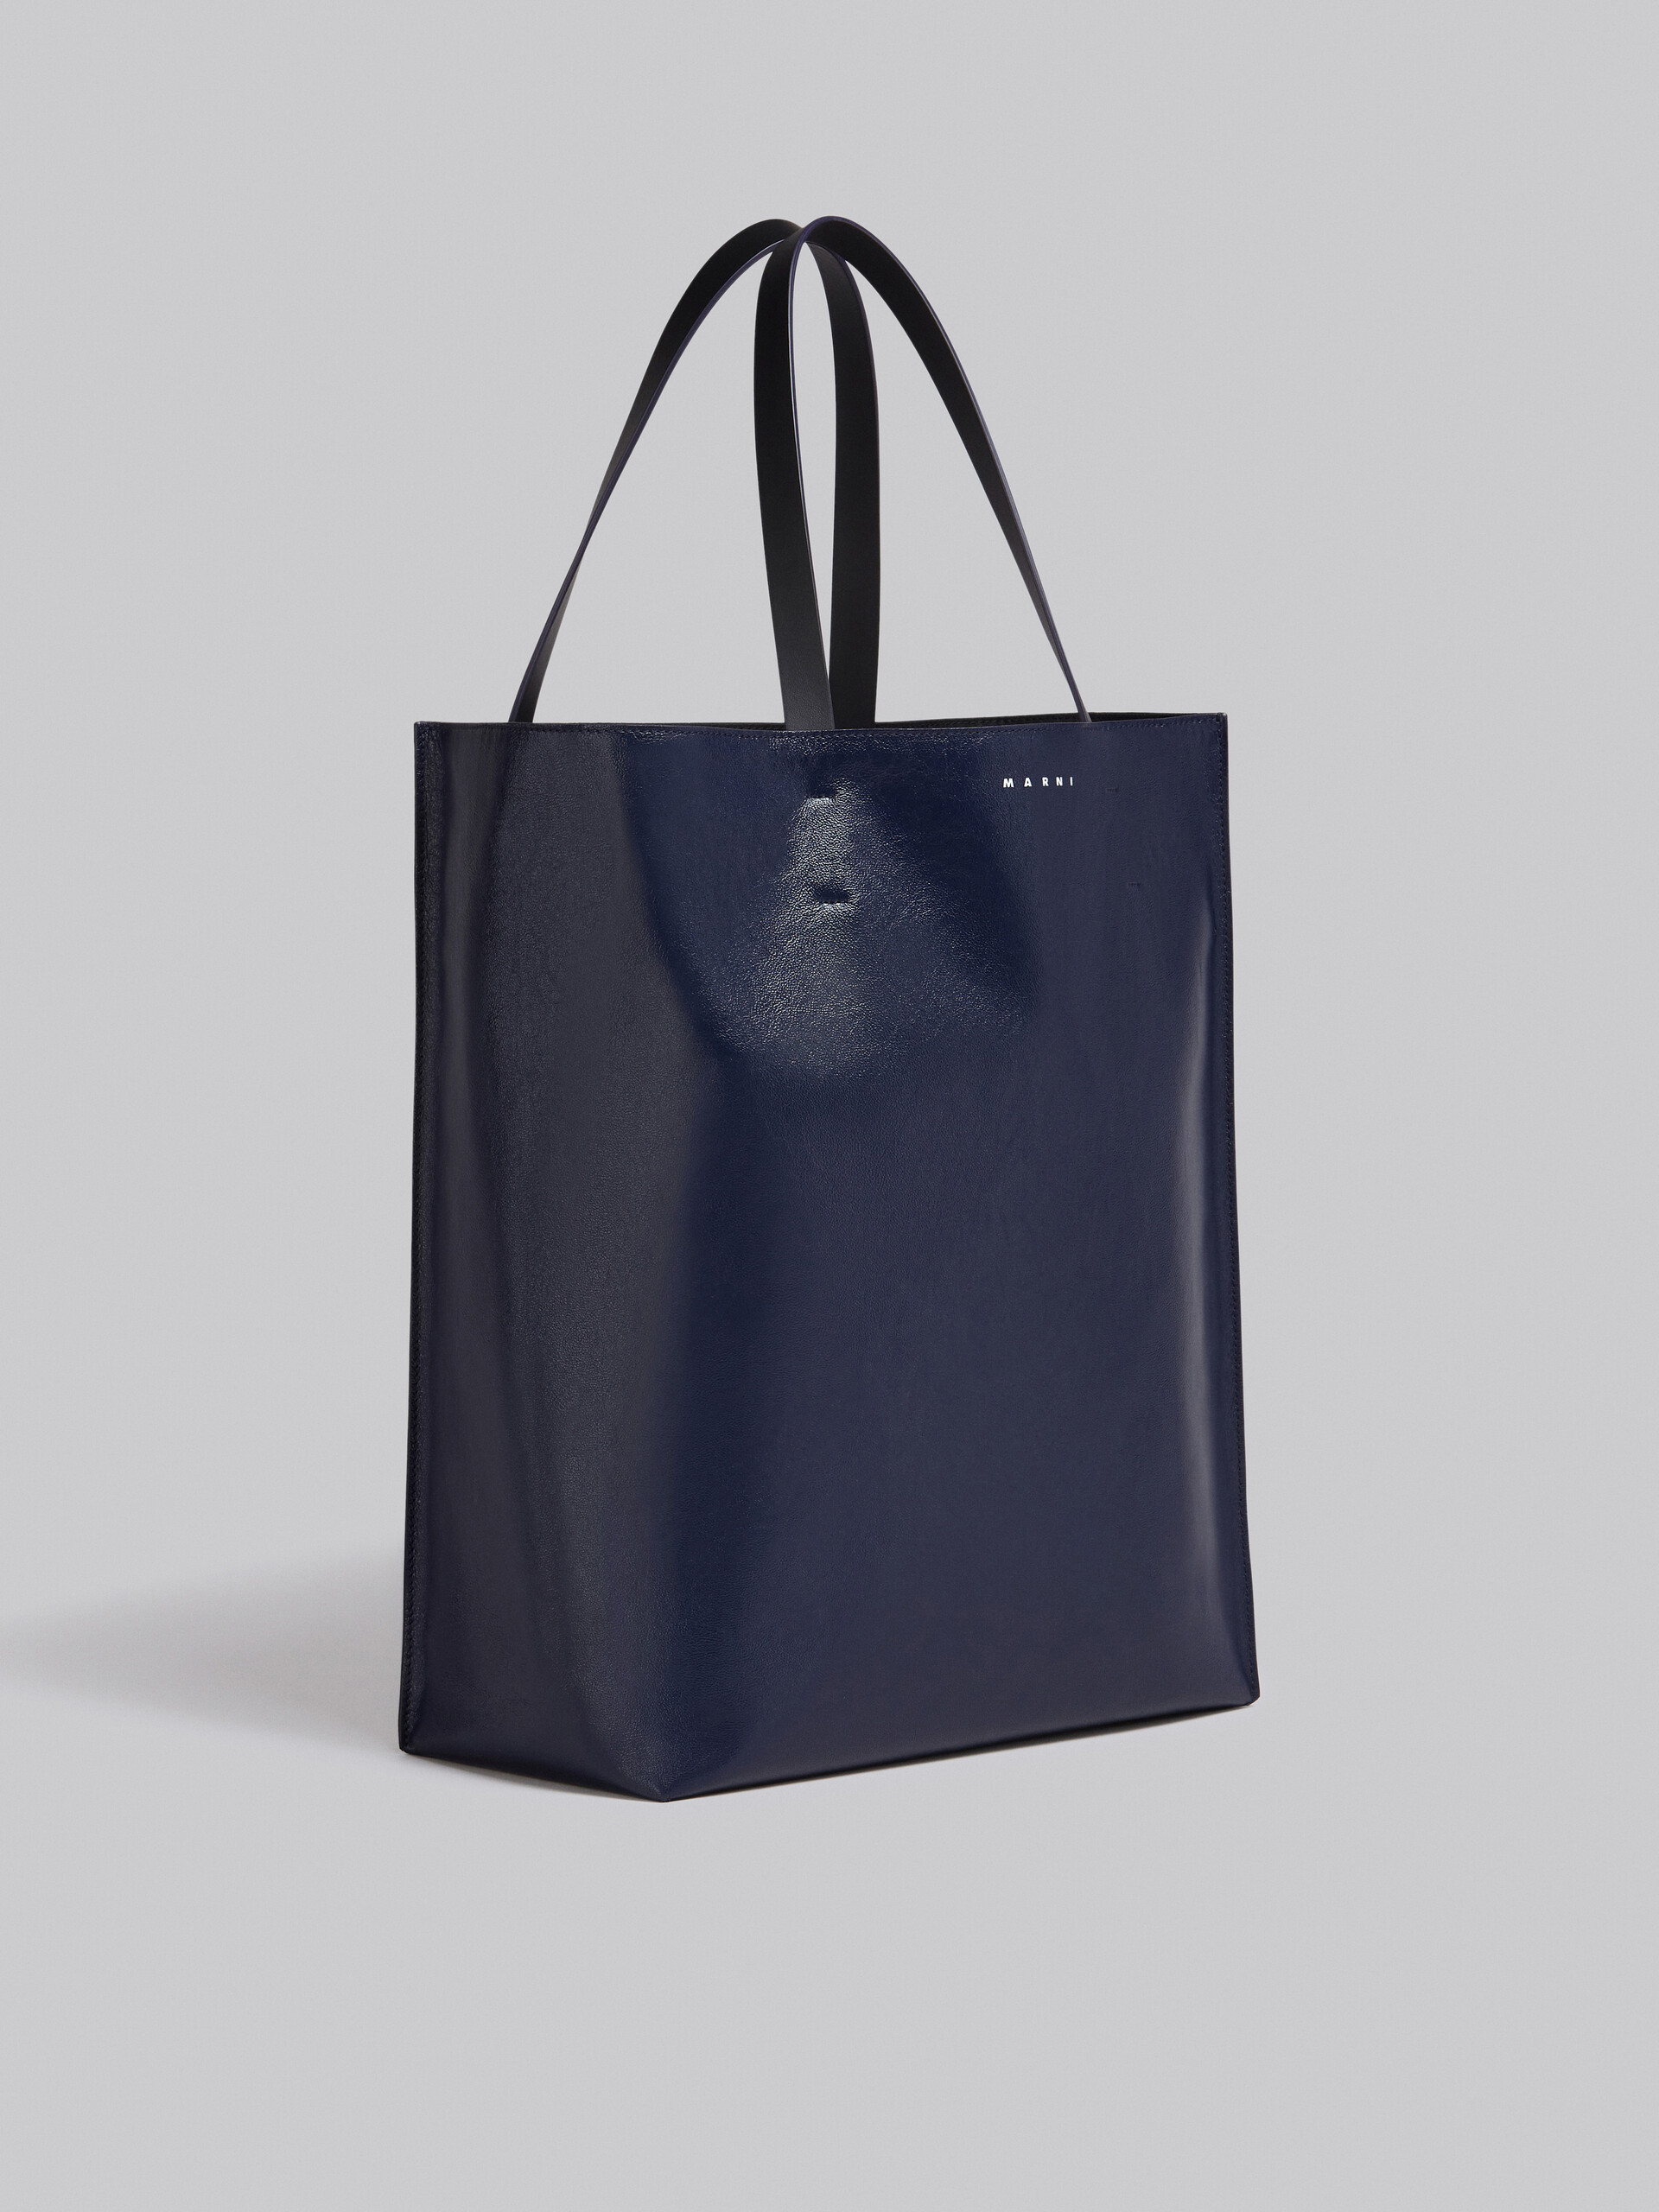 Museo Soft Large Bag in black and blue leather - Shopping Bags - Image 6